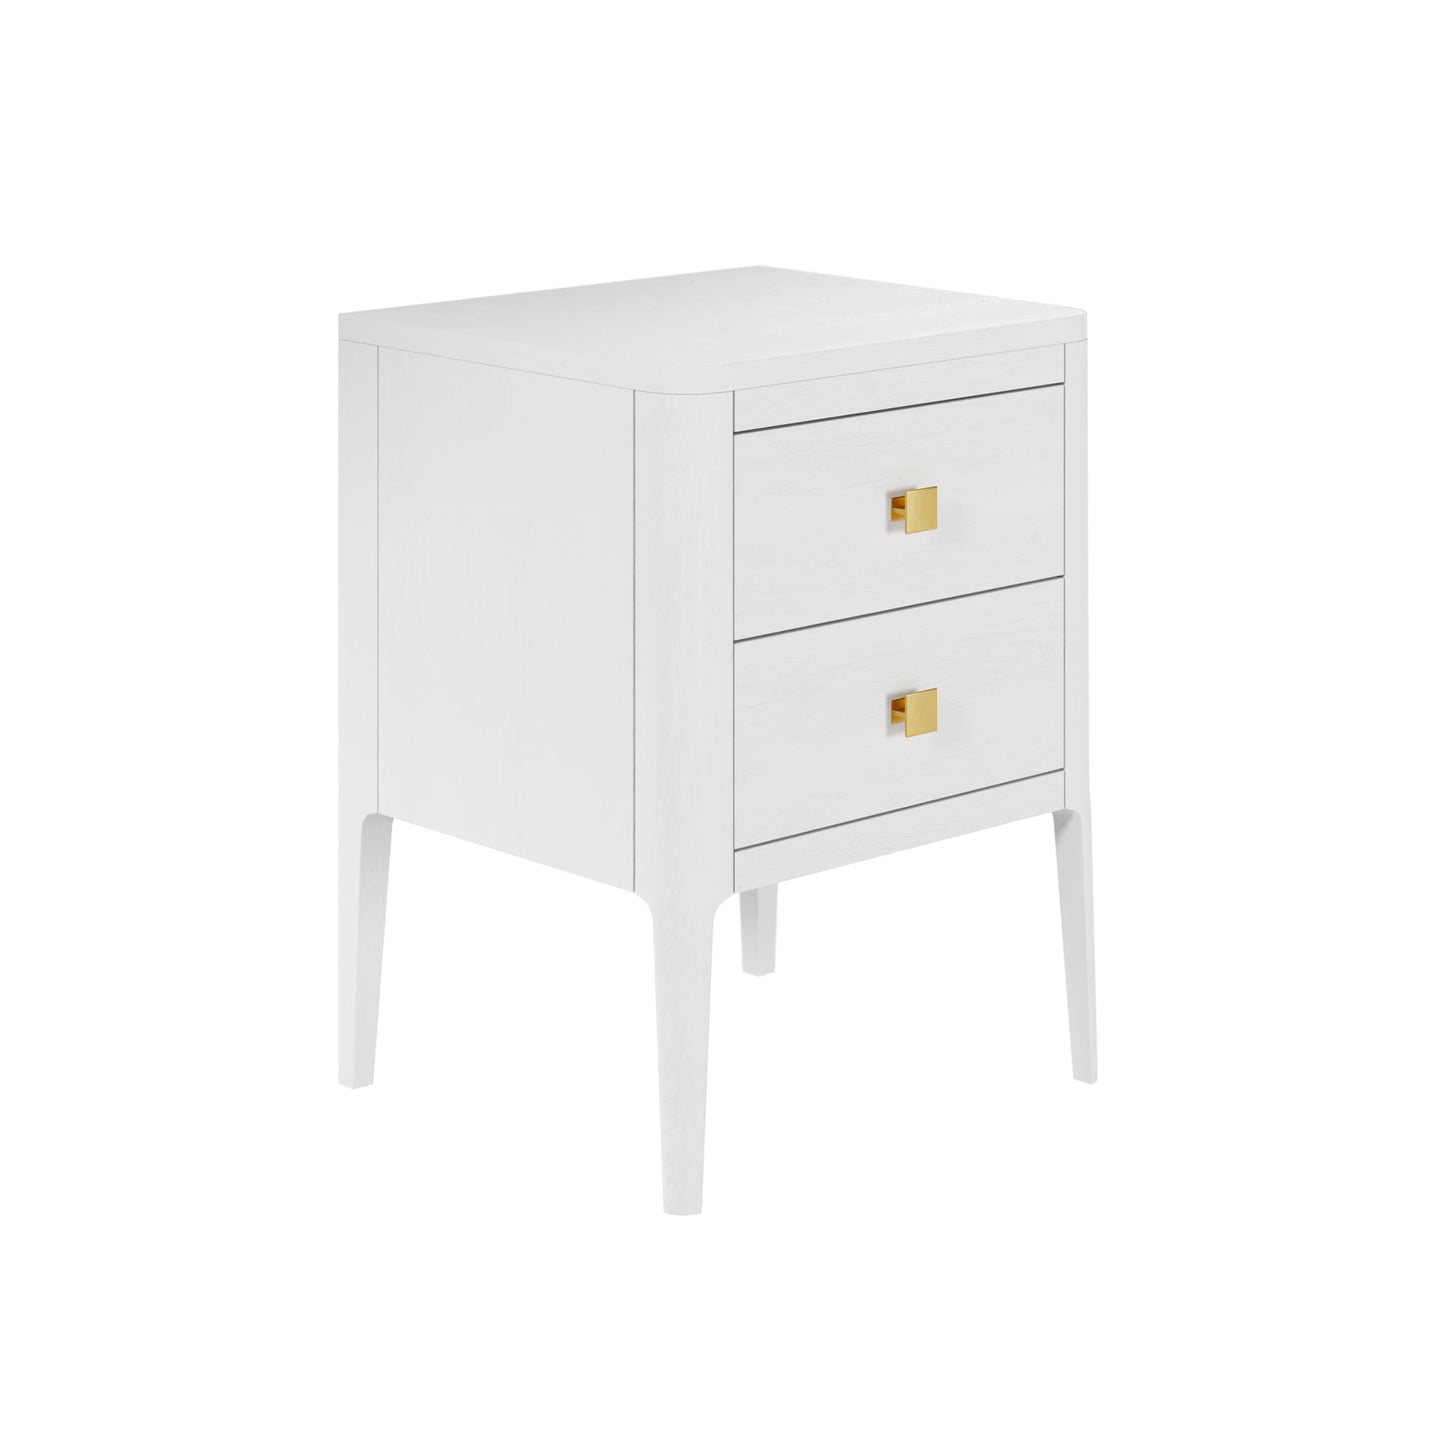 White Abberley Two Drawer Bedside Table